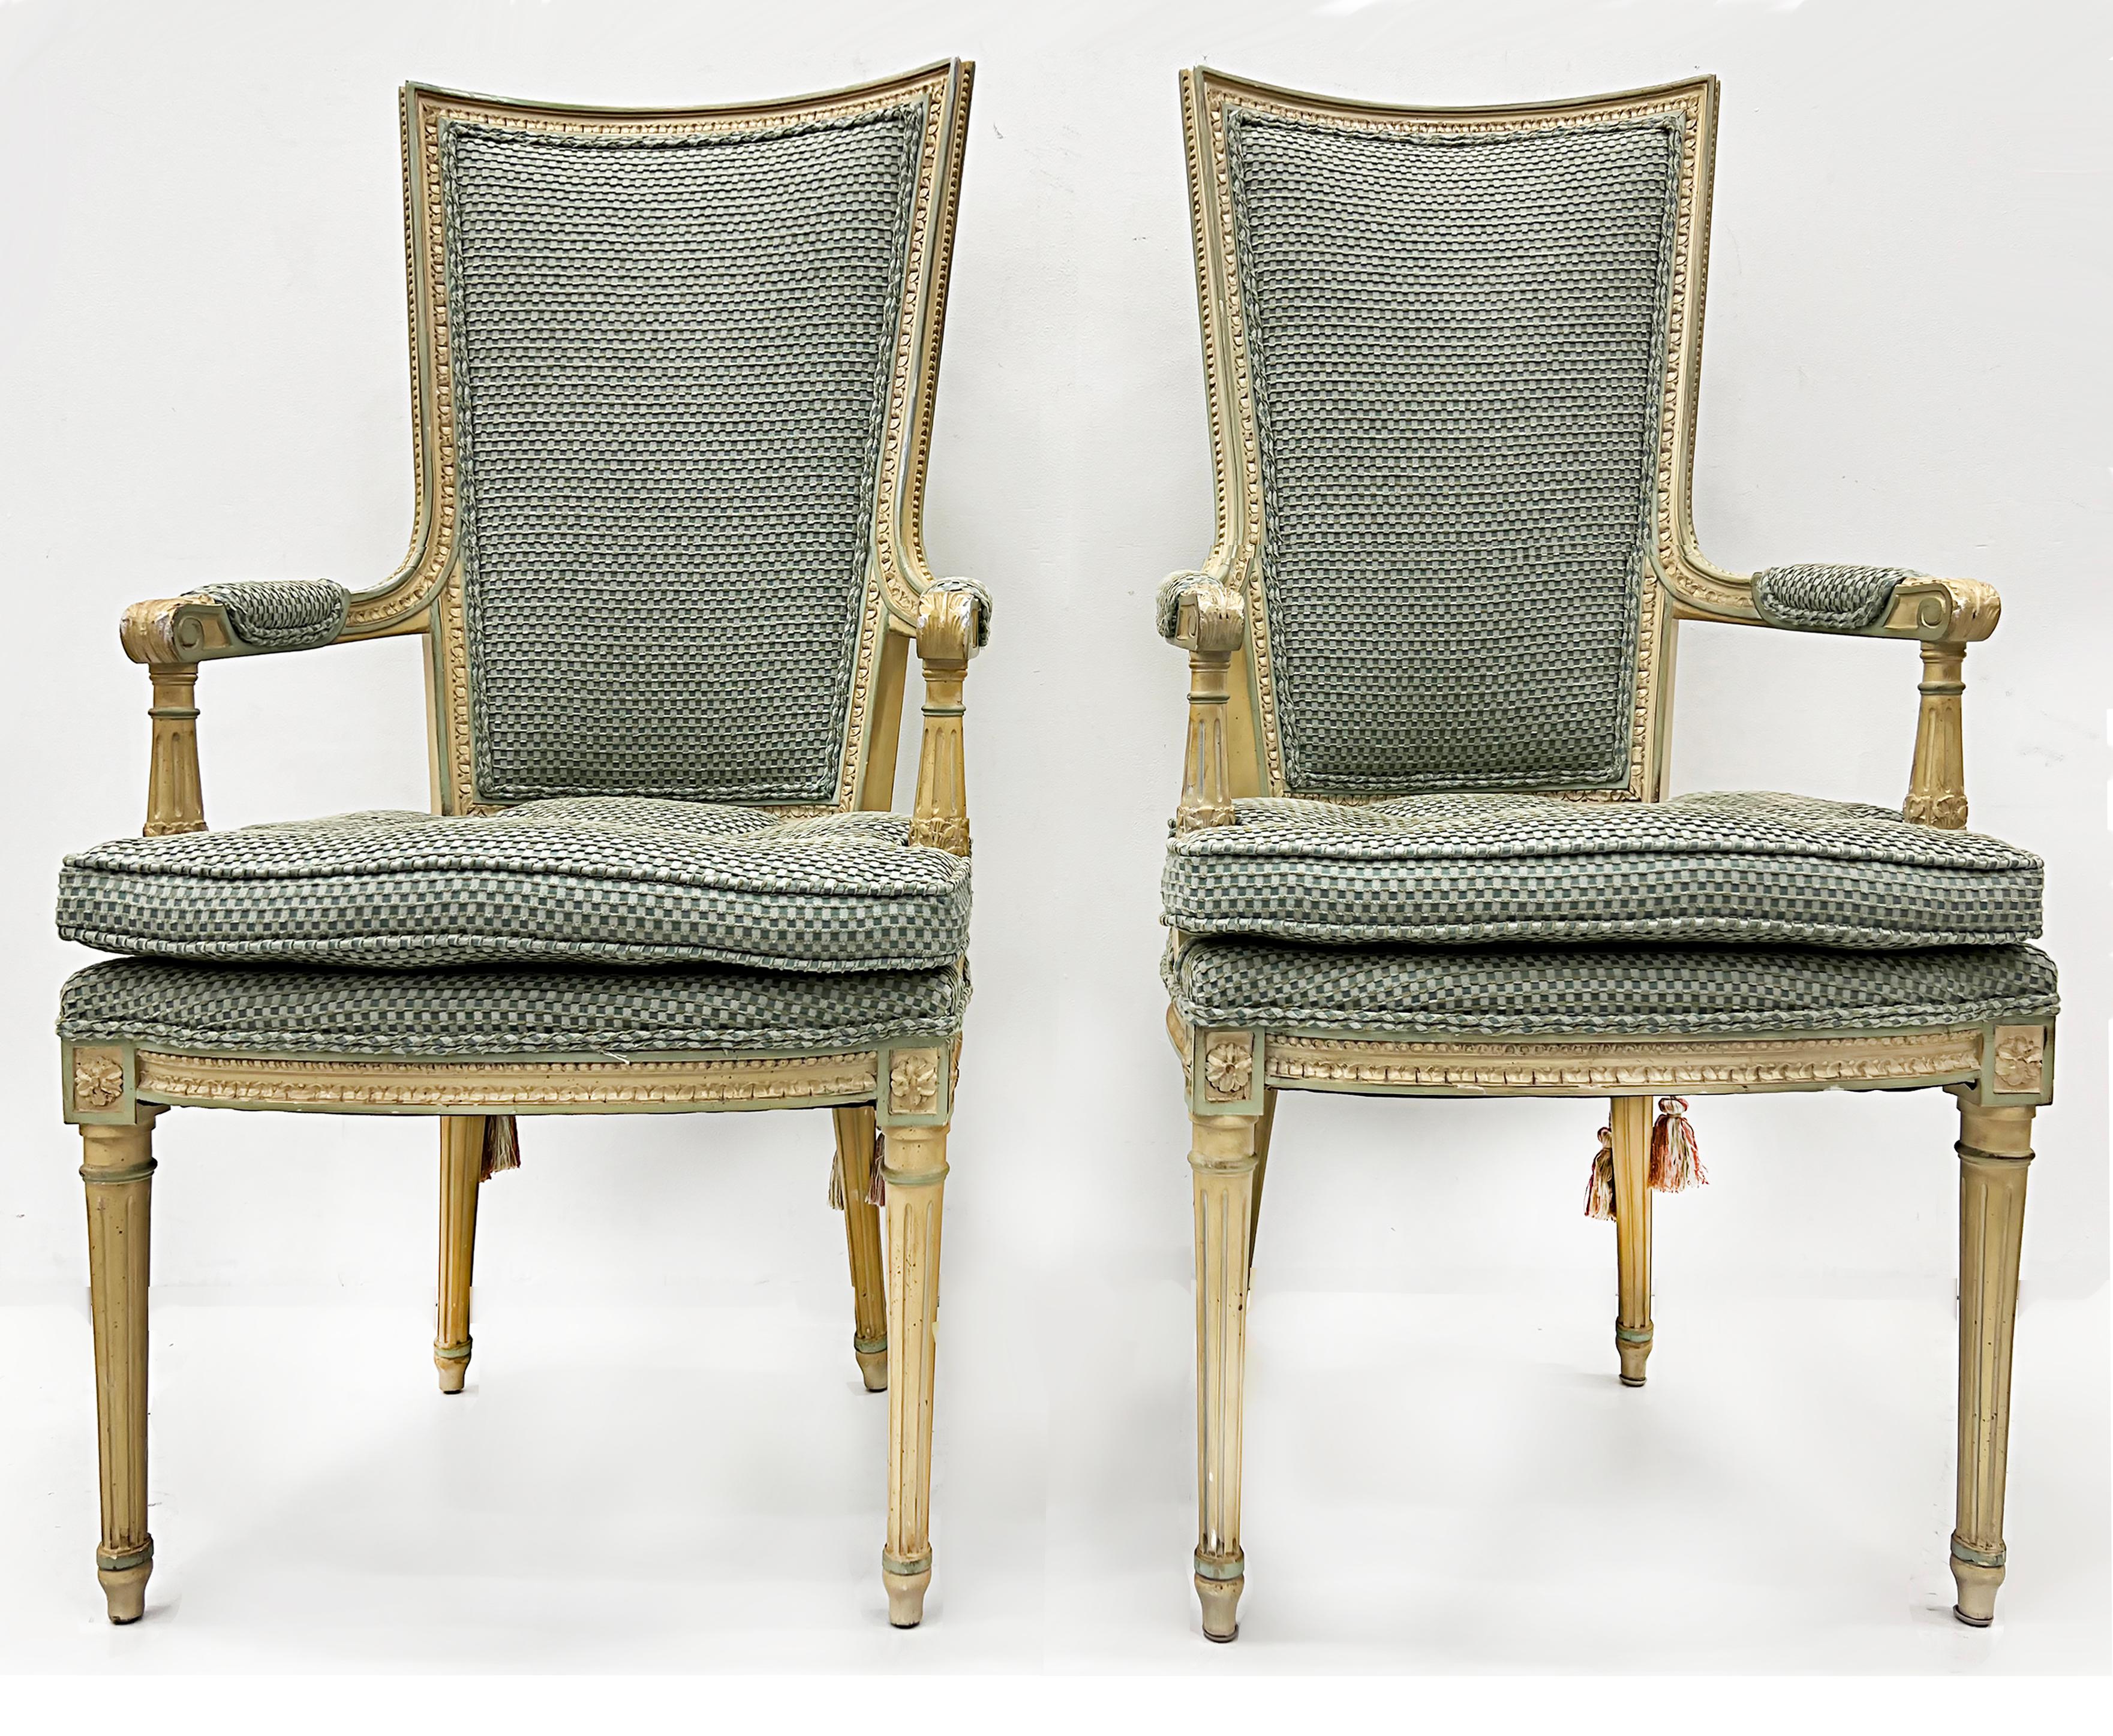 Hollywood Regency neoclassical style high back armchairs

Offered for sale is an elegant pair of Hollywood Regency high back armchairs that have been created in the Neoclassical style. The frames are nicely carved with Neoclassical details in wood